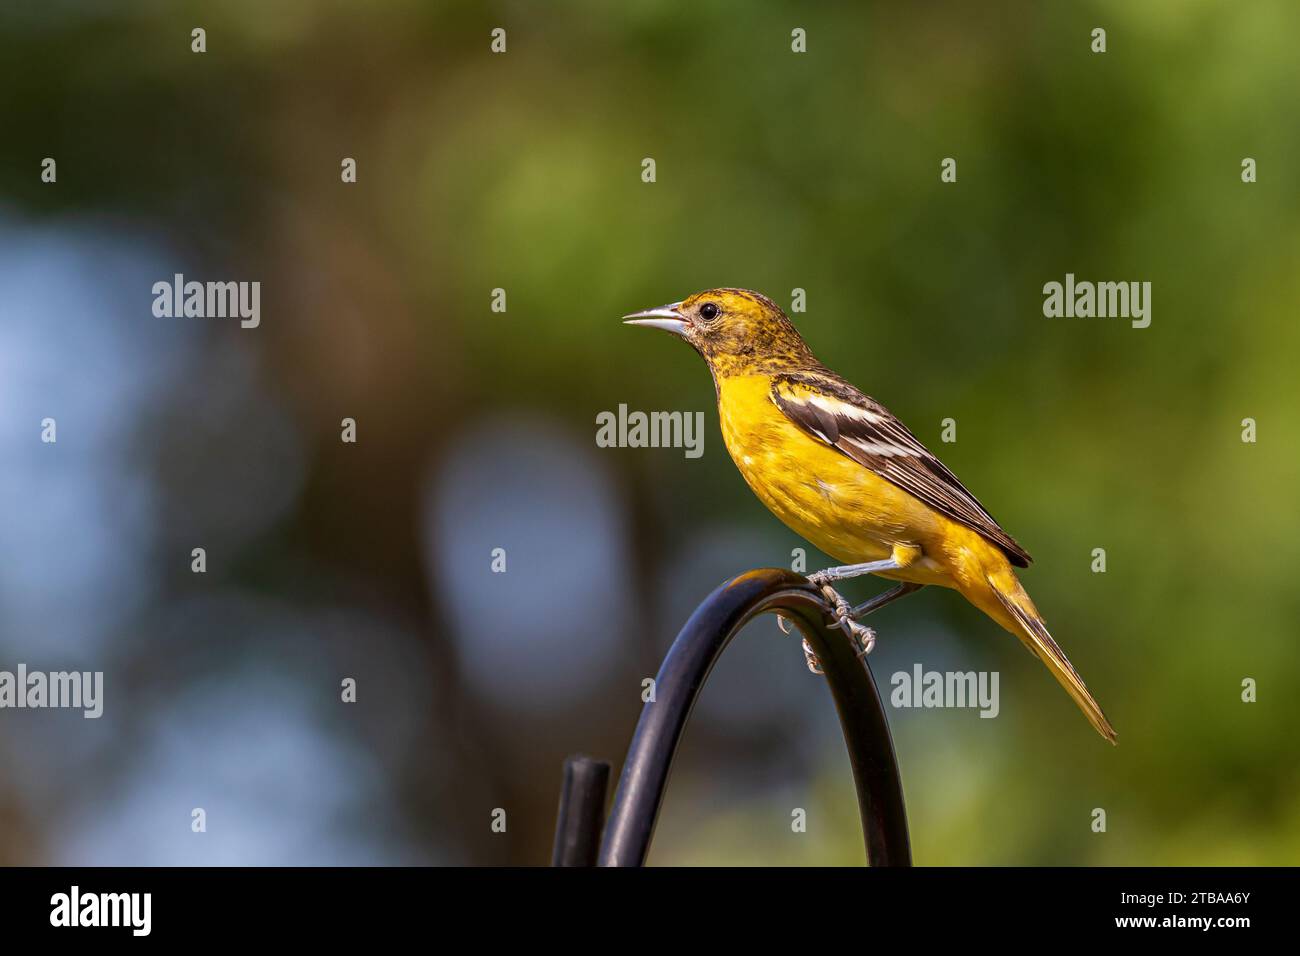 Closeup of female Baltimore Oriole perched on bird feeder. Concept of backyard birding, birdwatching and habitat preservation Stock Photo